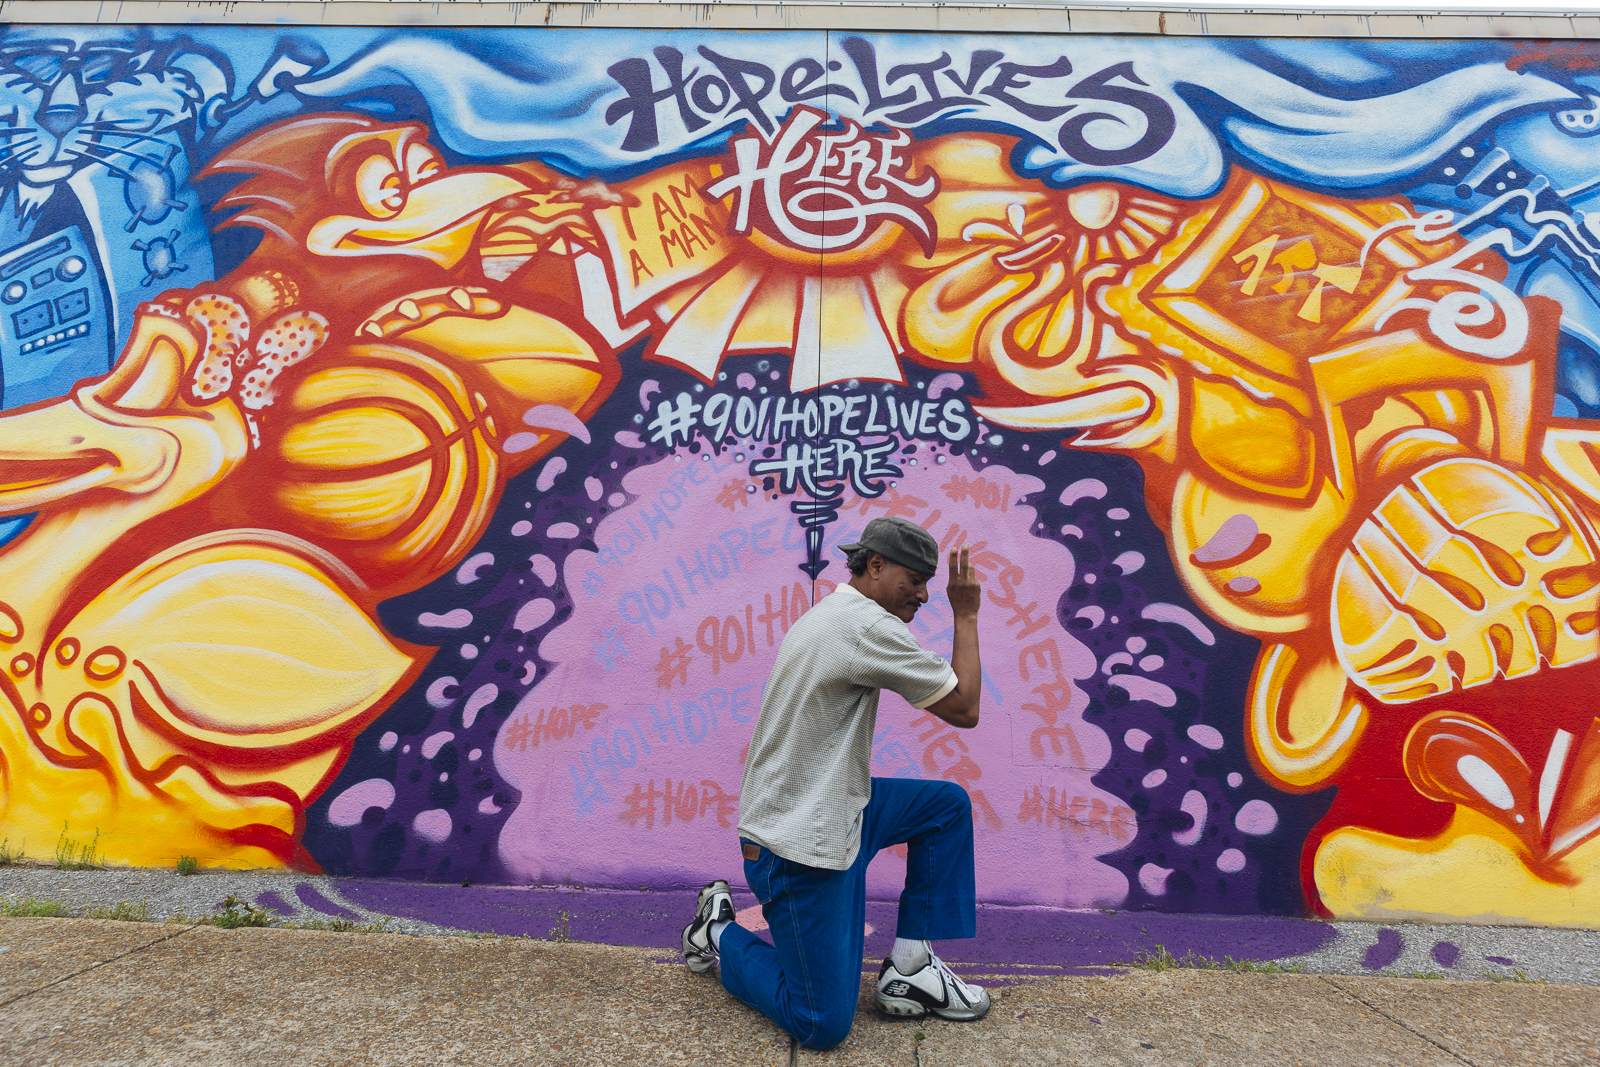 Local musician "Morris" poses in front of a mural by artist Toonkey Berry. (Ziggy Mack)